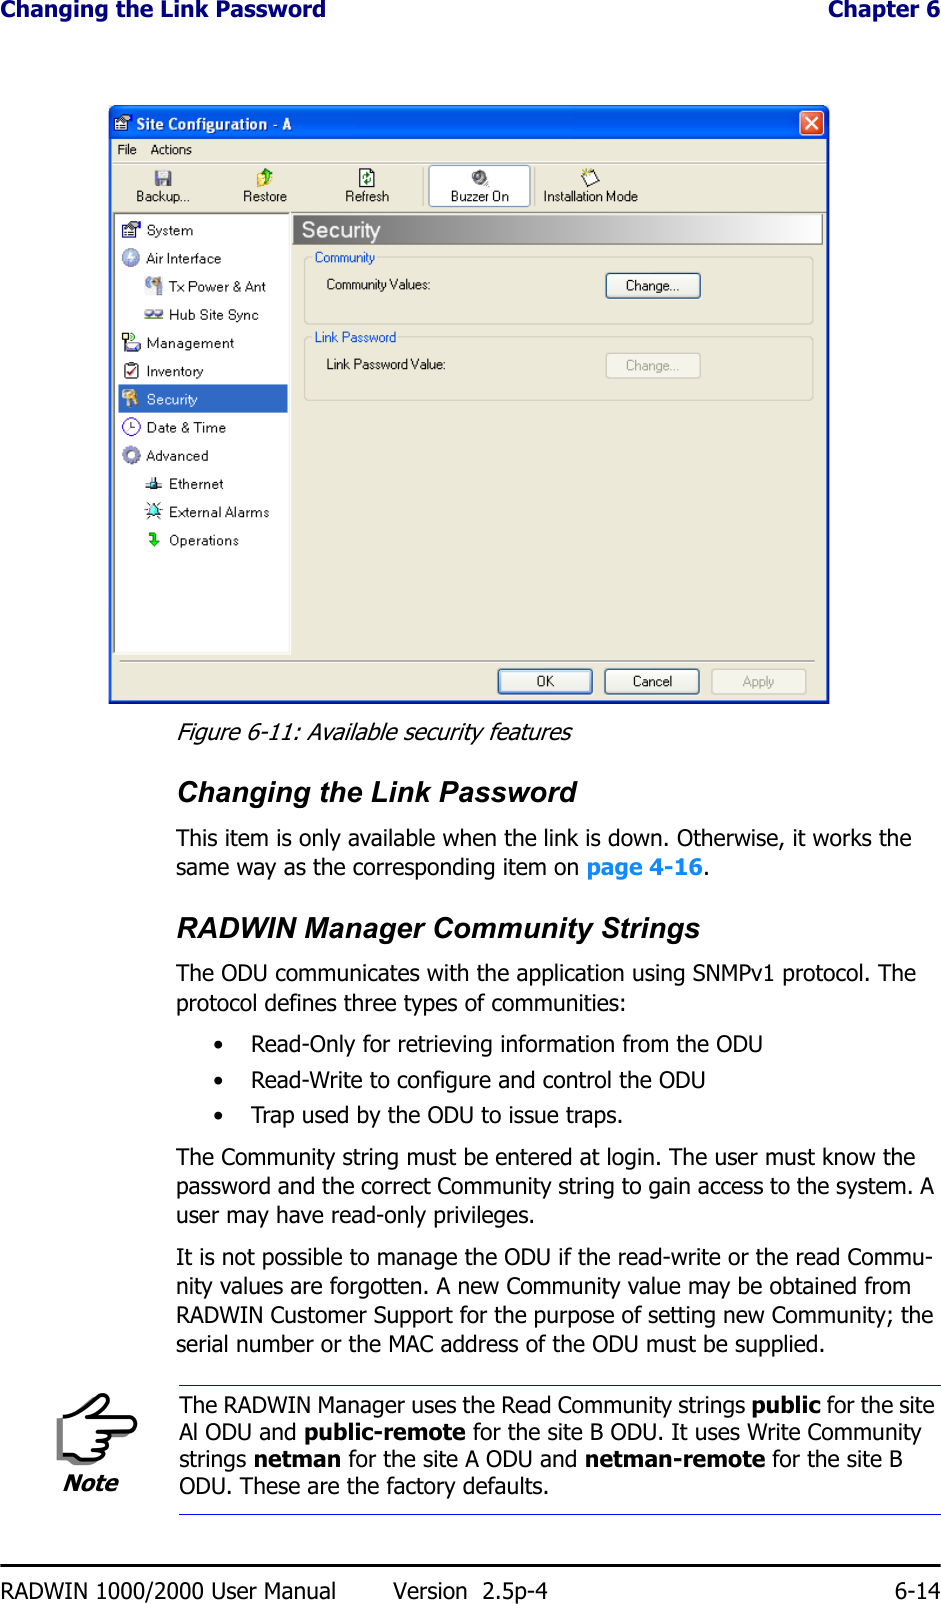 Changing the Link Password  Chapter 6RADWIN 1000/2000 User Manual Version  2.5p-4 6-14 Figure 6-11: Available security featuresChanging the Link PasswordThis item is only available when the link is down. Otherwise, it works the same way as the corresponding item on page 4-16.RADWIN Manager Community StringsThe ODU communicates with the application using SNMPv1 protocol. The protocol defines three types of communities:• Read-Only for retrieving information from the ODU• Read-Write to configure and control the ODU• Trap used by the ODU to issue traps.The Community string must be entered at login. The user must know the password and the correct Community string to gain access to the system. A user may have read-only privileges.It is not possible to manage the ODU if the read-write or the read Commu-nity values are forgotten. A new Community value may be obtained from RADWIN Customer Support for the purpose of setting new Community; the serial number or the MAC address of the ODU must be supplied.NoteThe RADWIN Manager uses the Read Community strings public for the site Al ODU and public-remote for the site B ODU. It uses Write Community strings netman for the site A ODU and netman-remote for the site B ODU. These are the factory defaults.